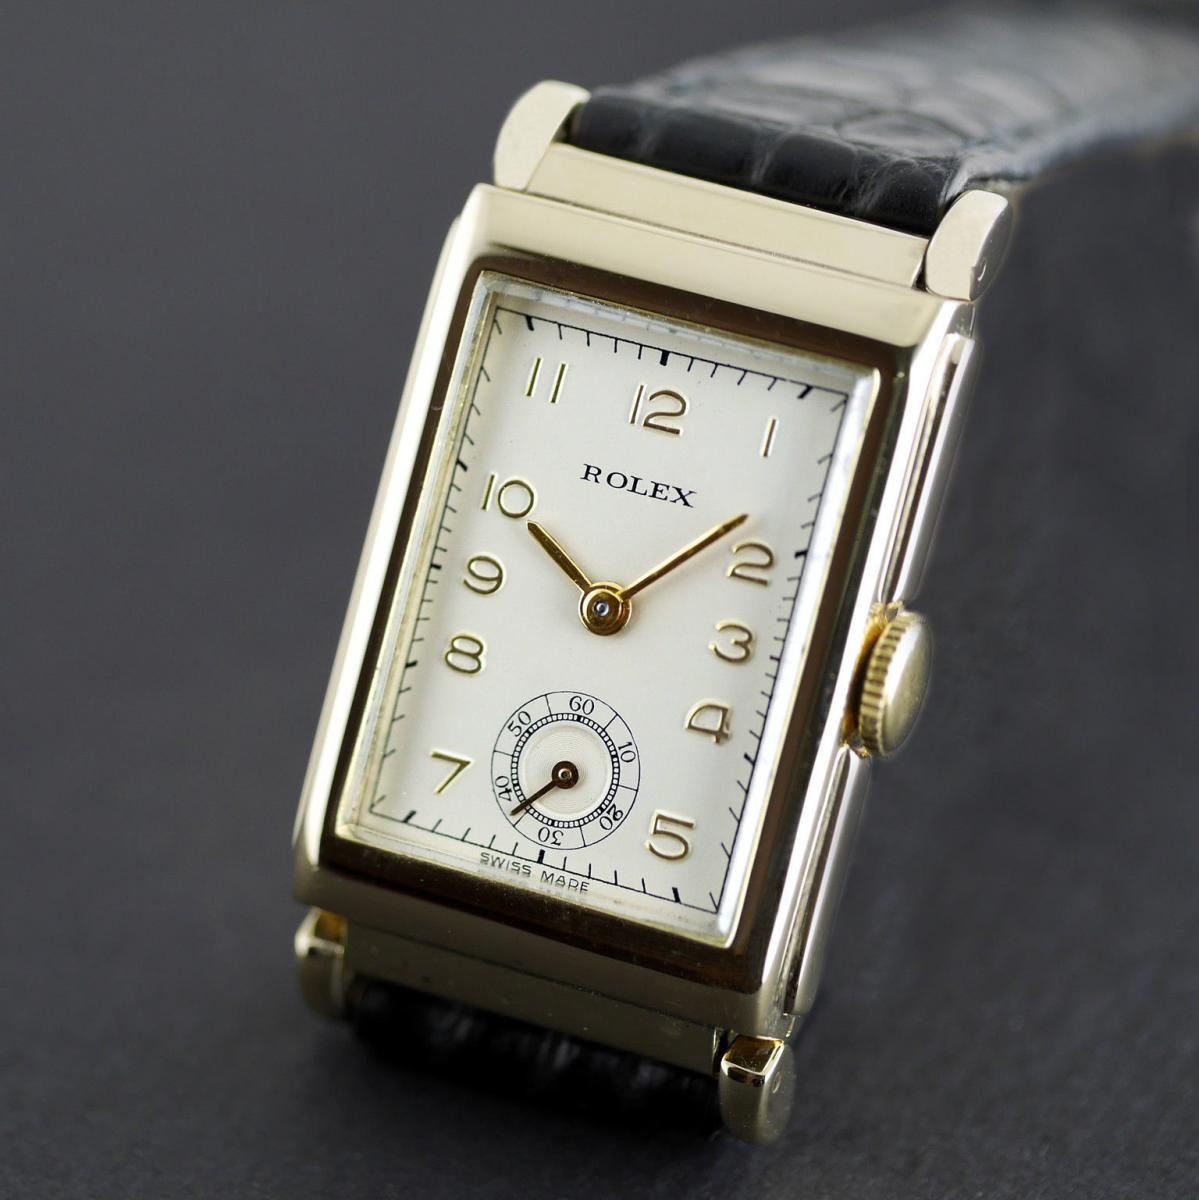 Rolex, Art Deco, Gold dated 1937 With Articulated Lugs